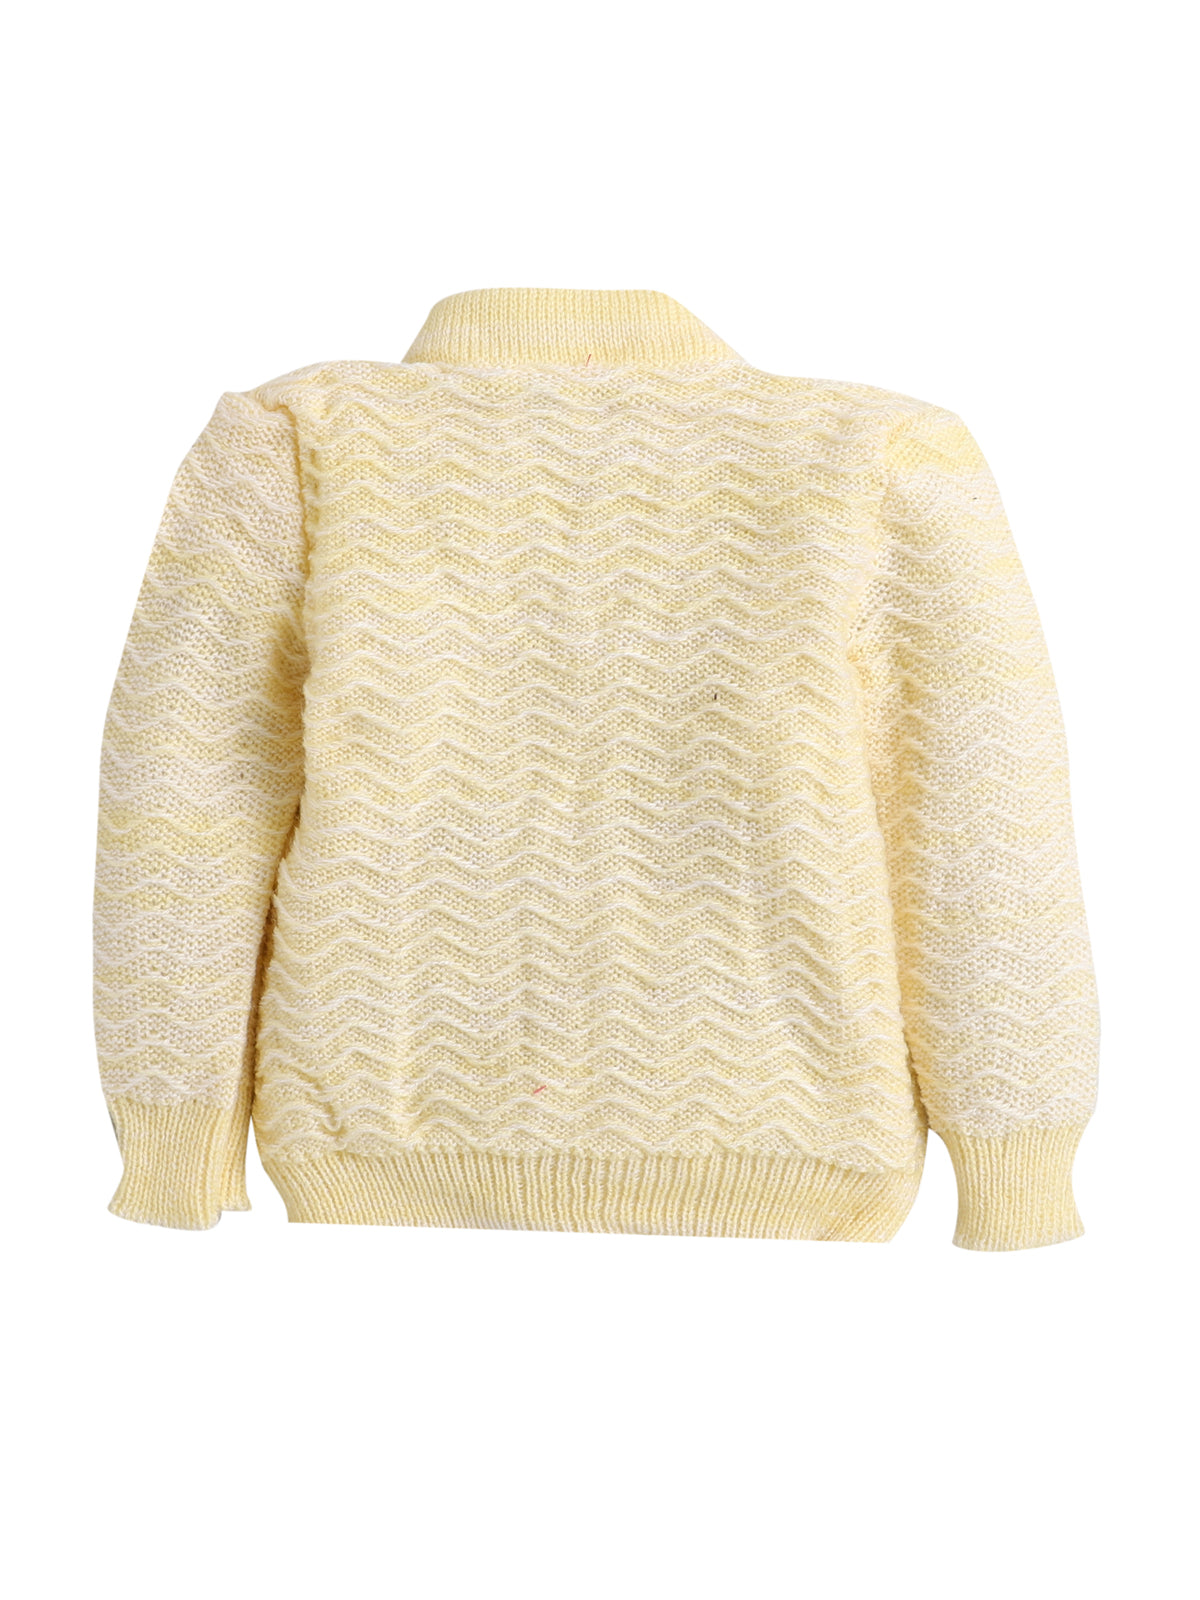 Front Open Zig-zag crayon pattern Yellow Color sweater with caps and socks